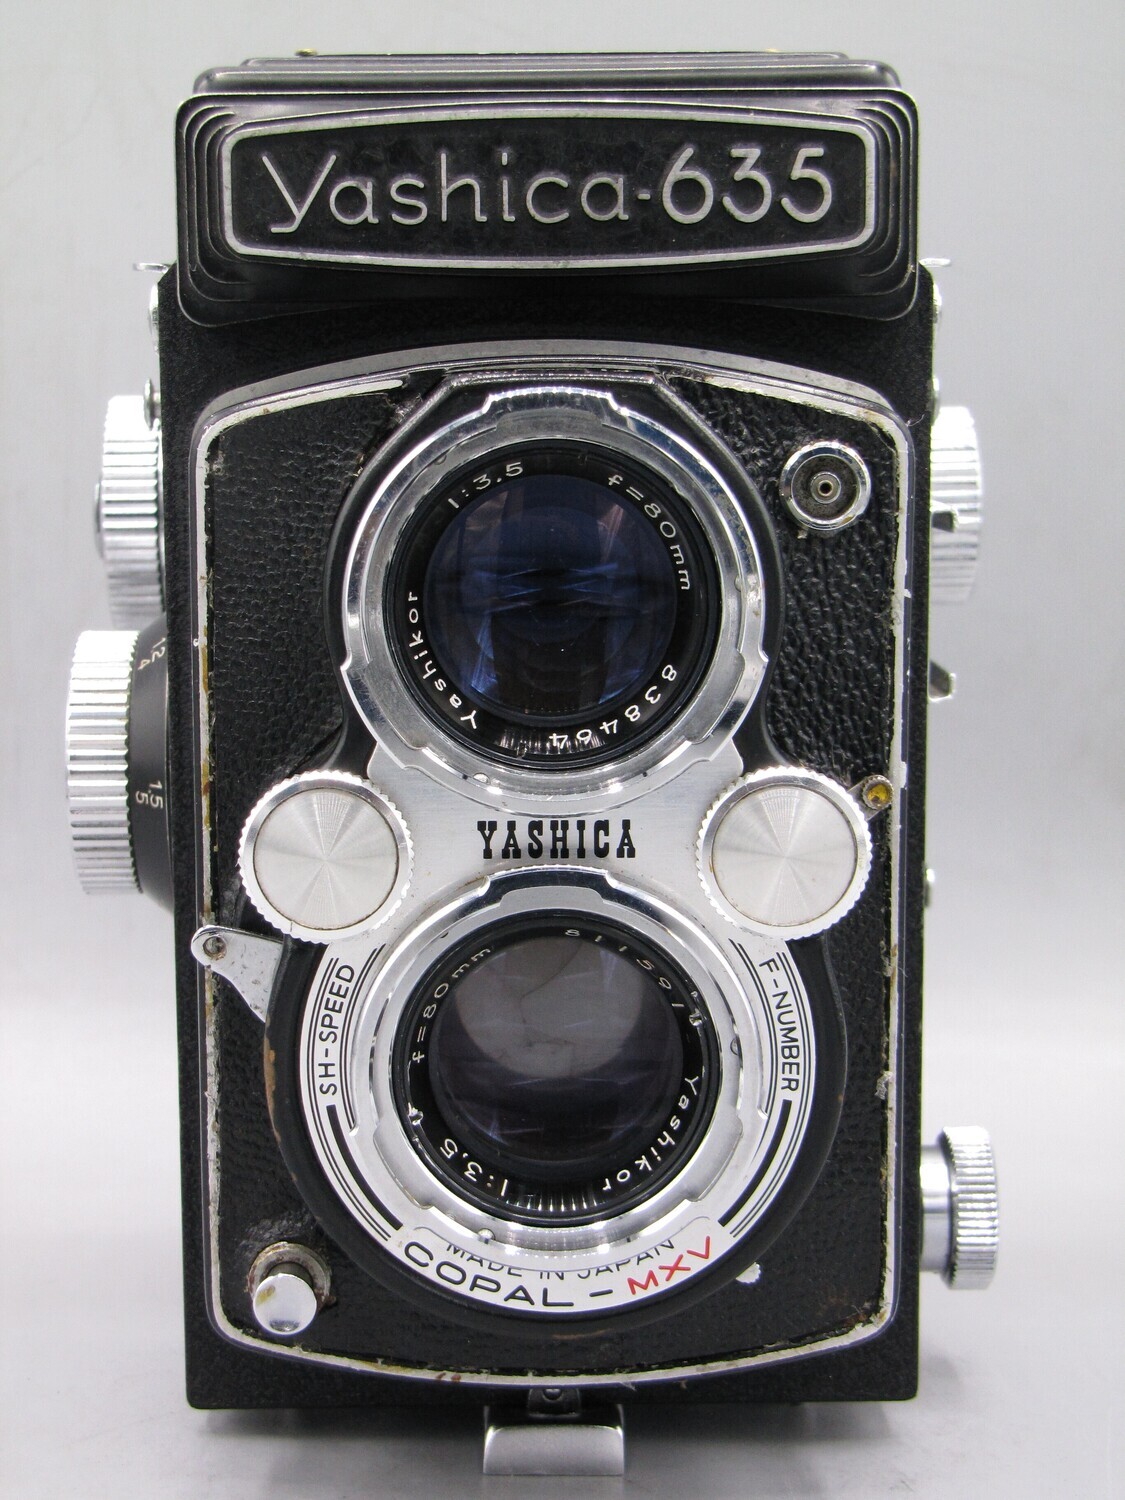 Yashica 635 TLR Camera CLAD SEALS Film Tested